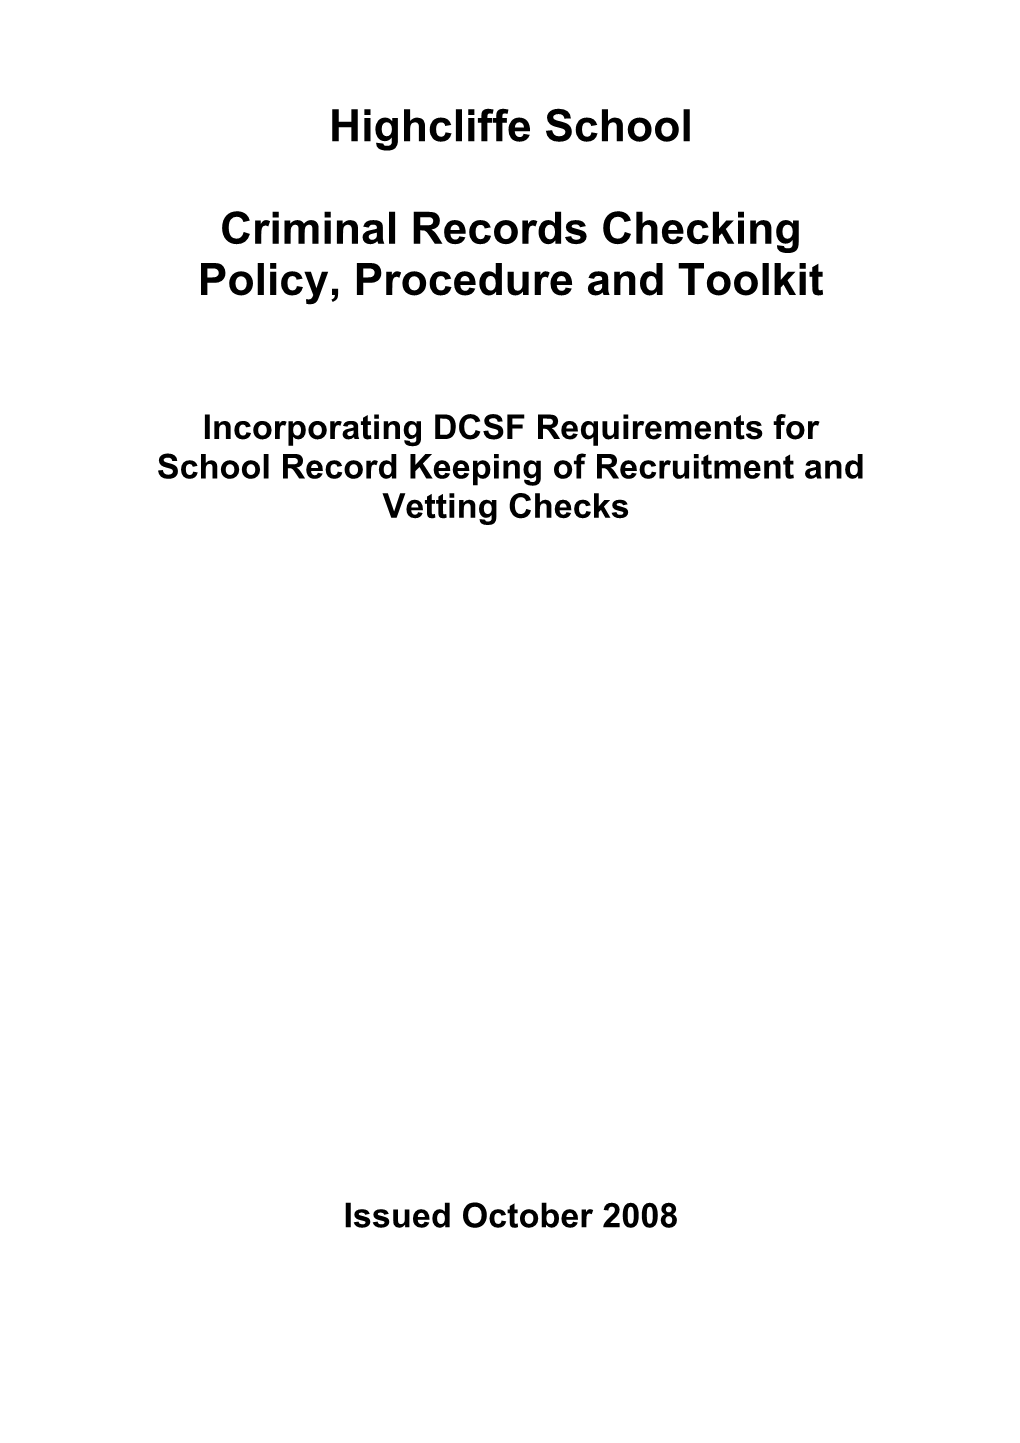 Criminal Records Checking Policy, Procedure and Toolkit